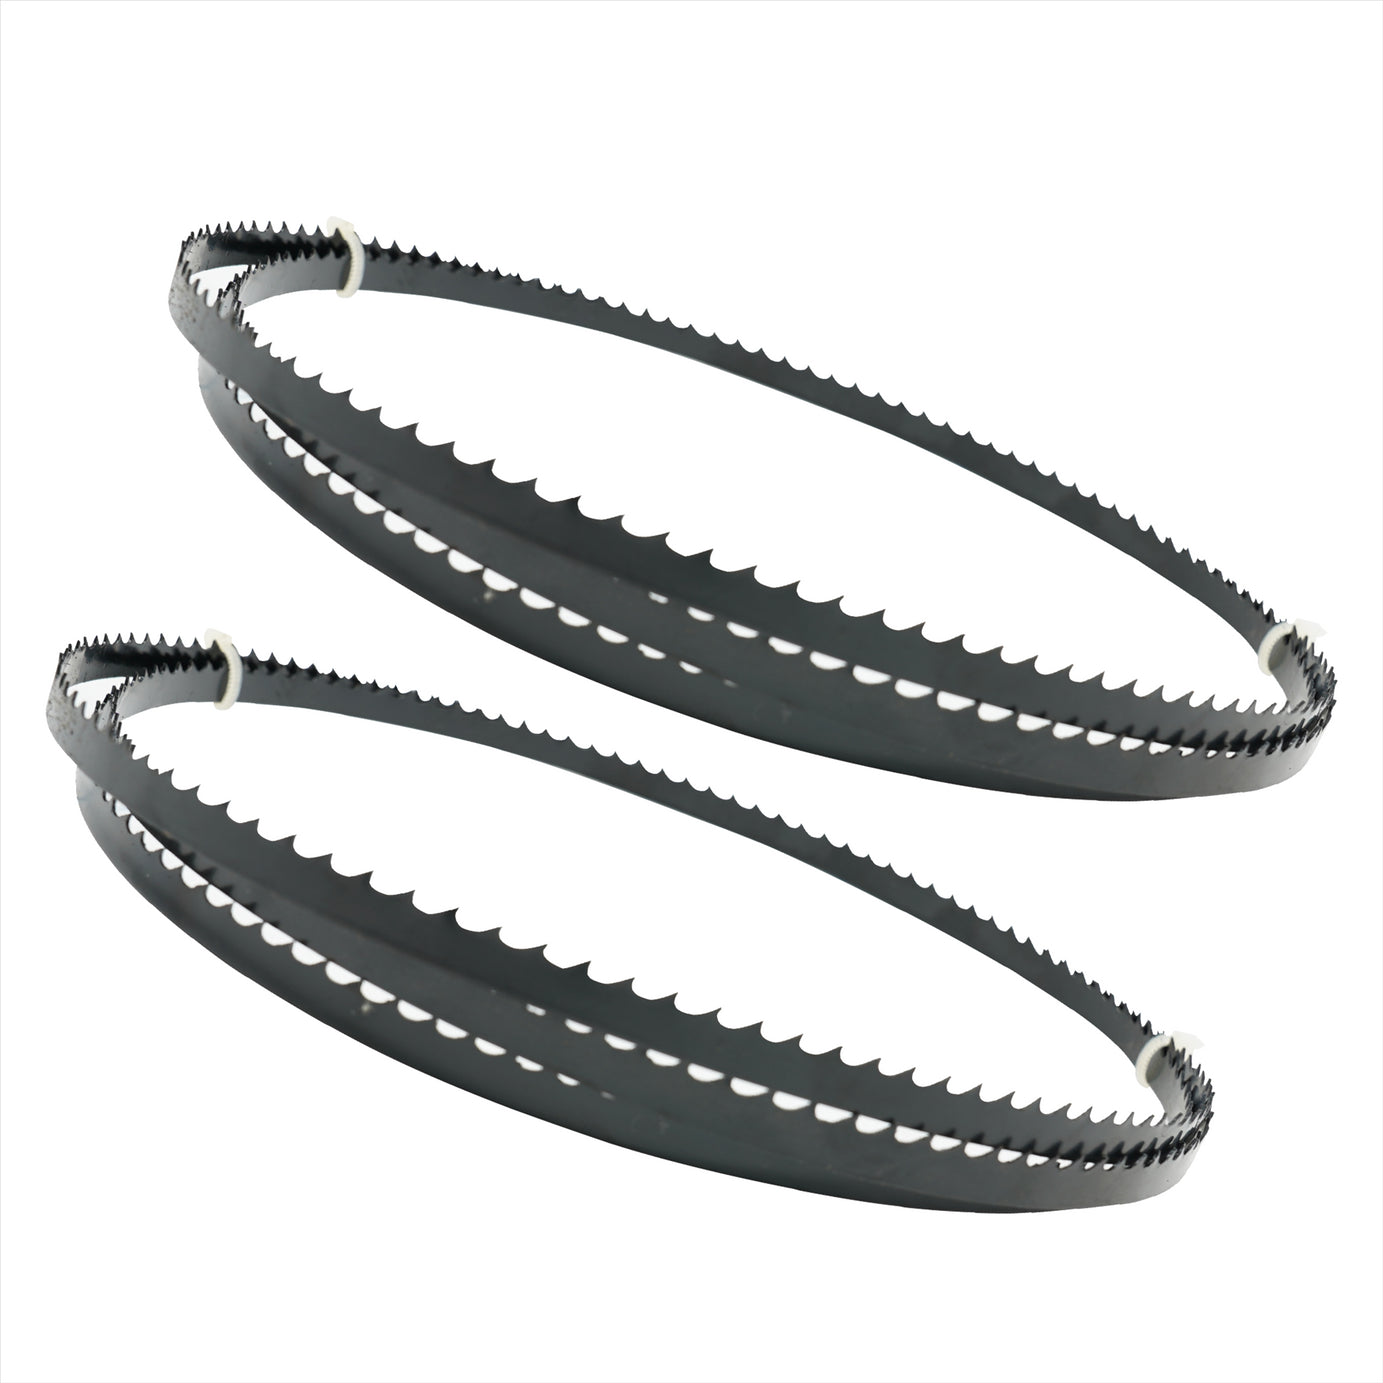 1425mm (56") Bandsaw Blades 6 Tpi For Cutting Metal Plastic Wood 2 Pack